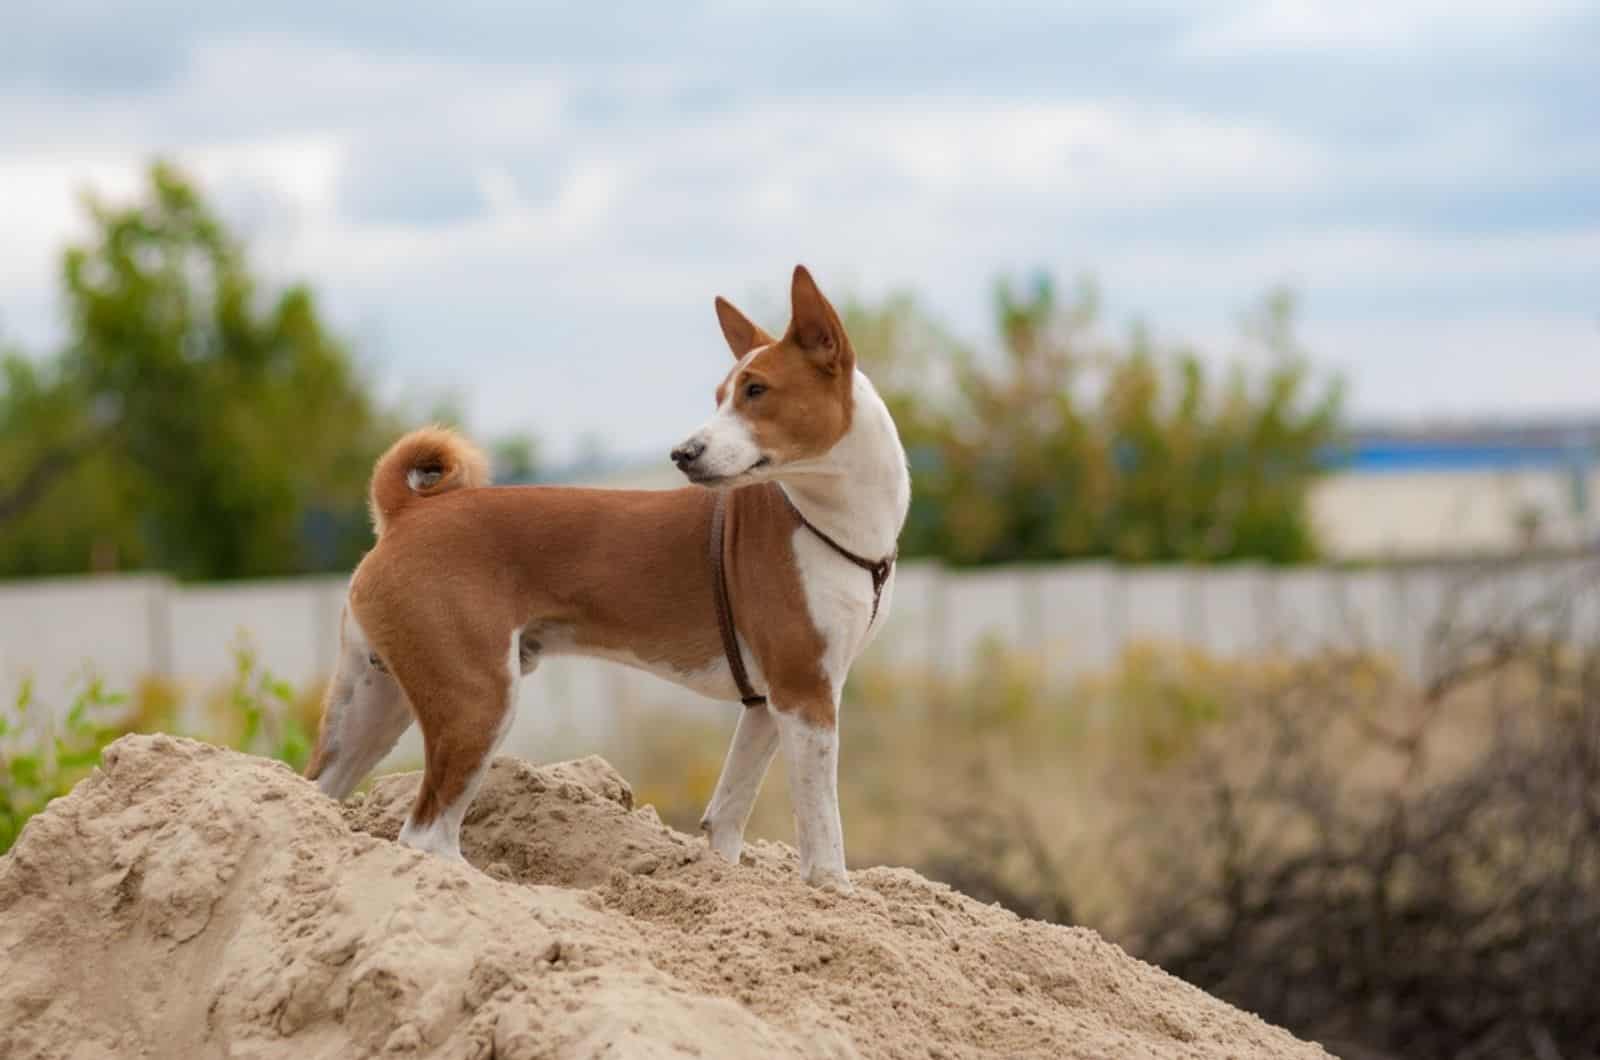 basenji dog standing on the sand hill in nature